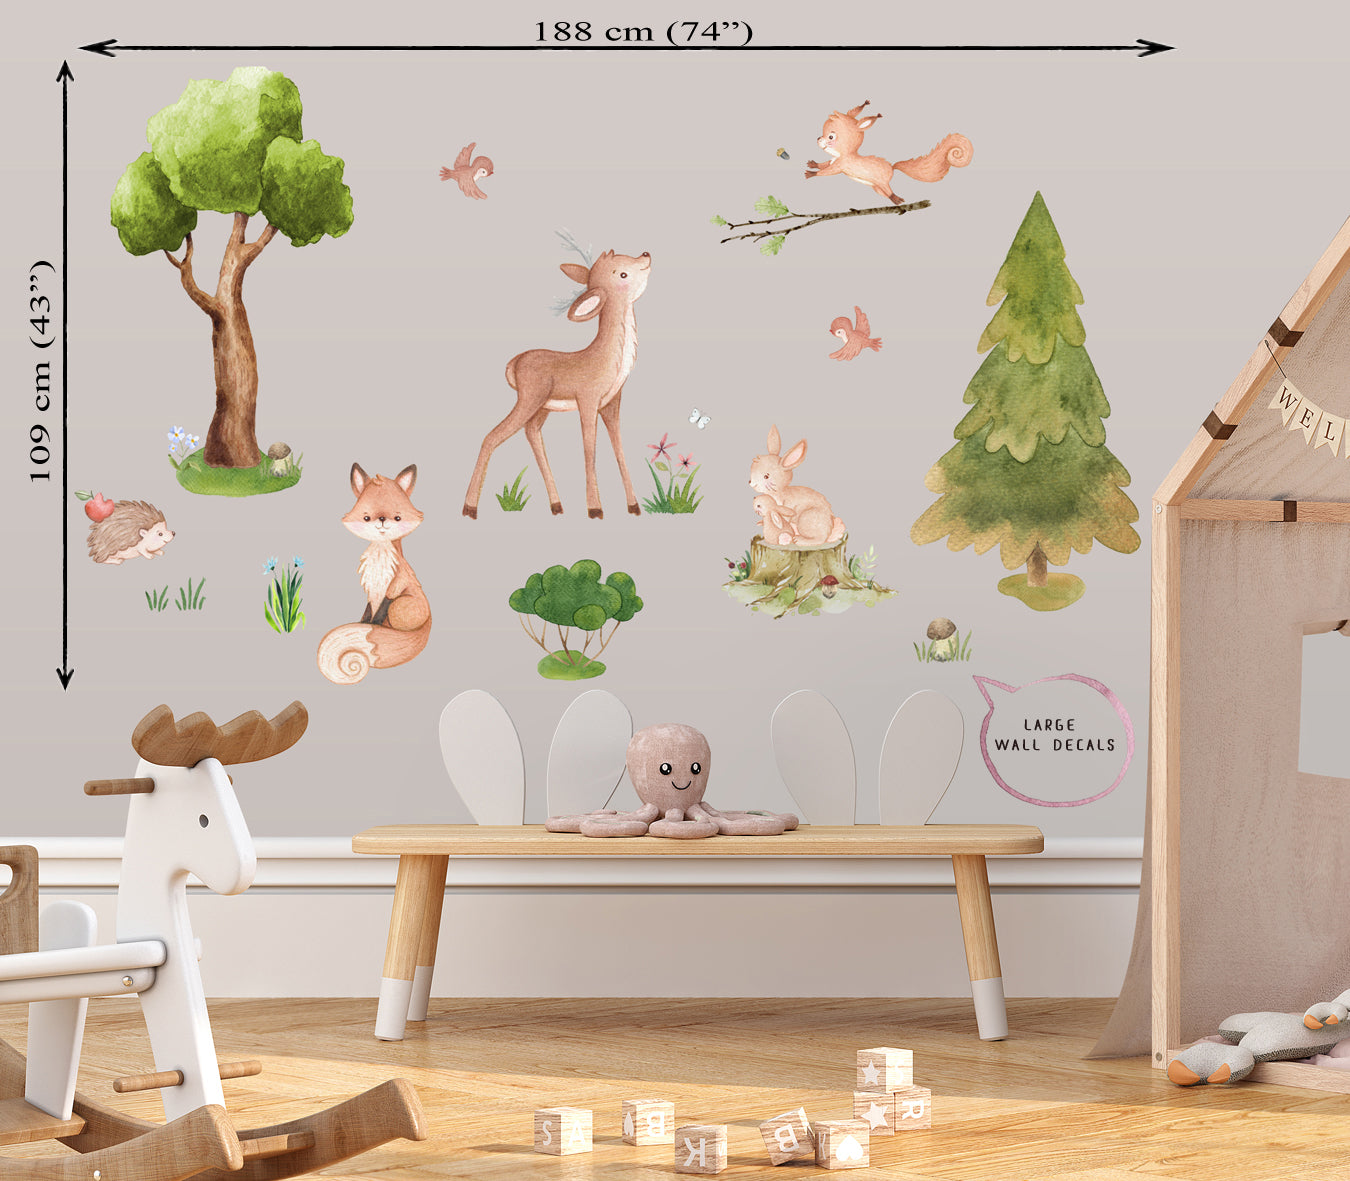 Forest animals - big wall decals for boy's room. Squirrel, fox and hare.